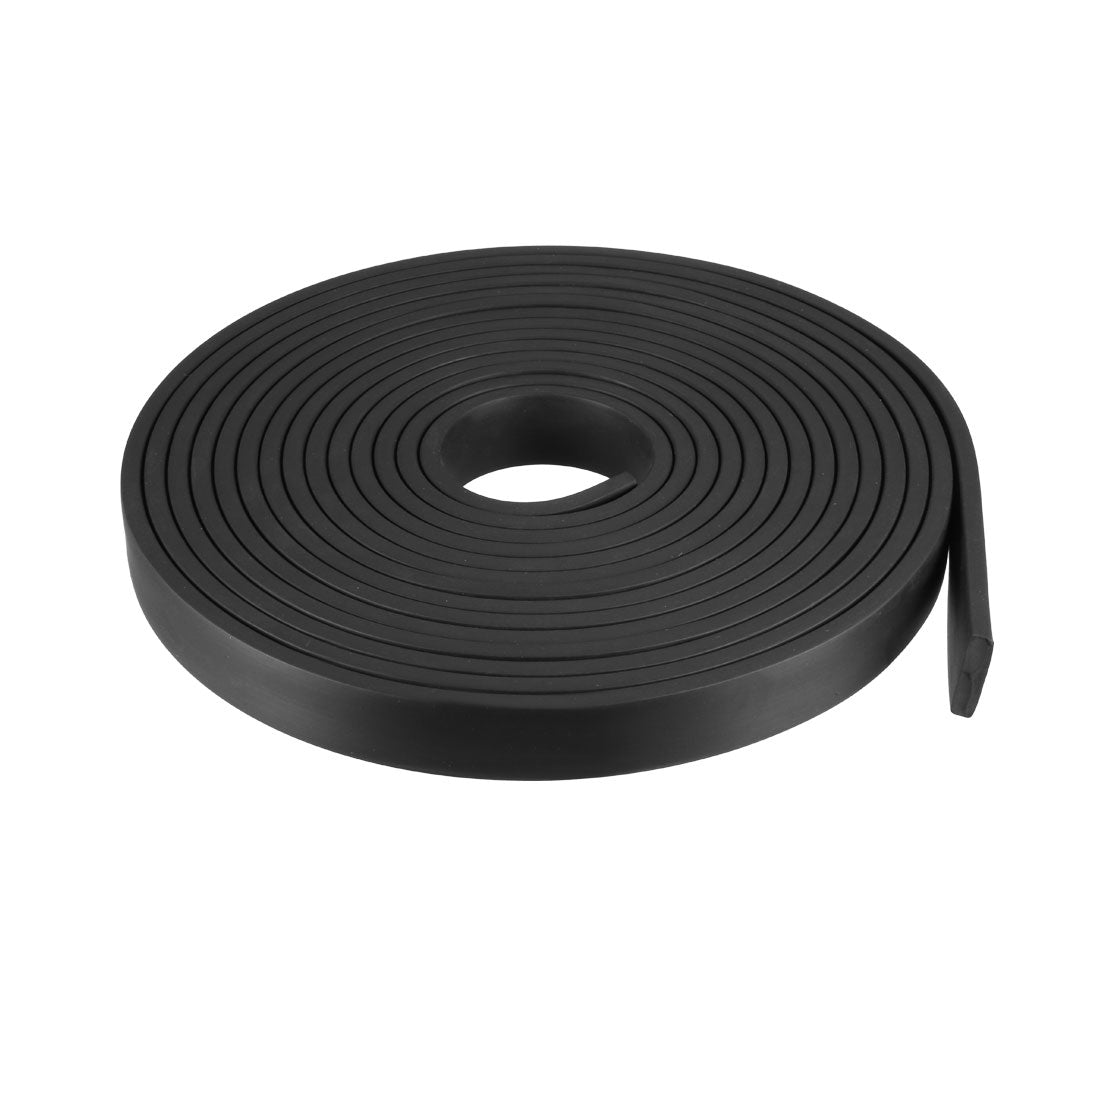 uxcell Uxcell Solid Rectangle Rubber Seal Strip 20mm Wide 5mm Thick, 5 Meters Long Black